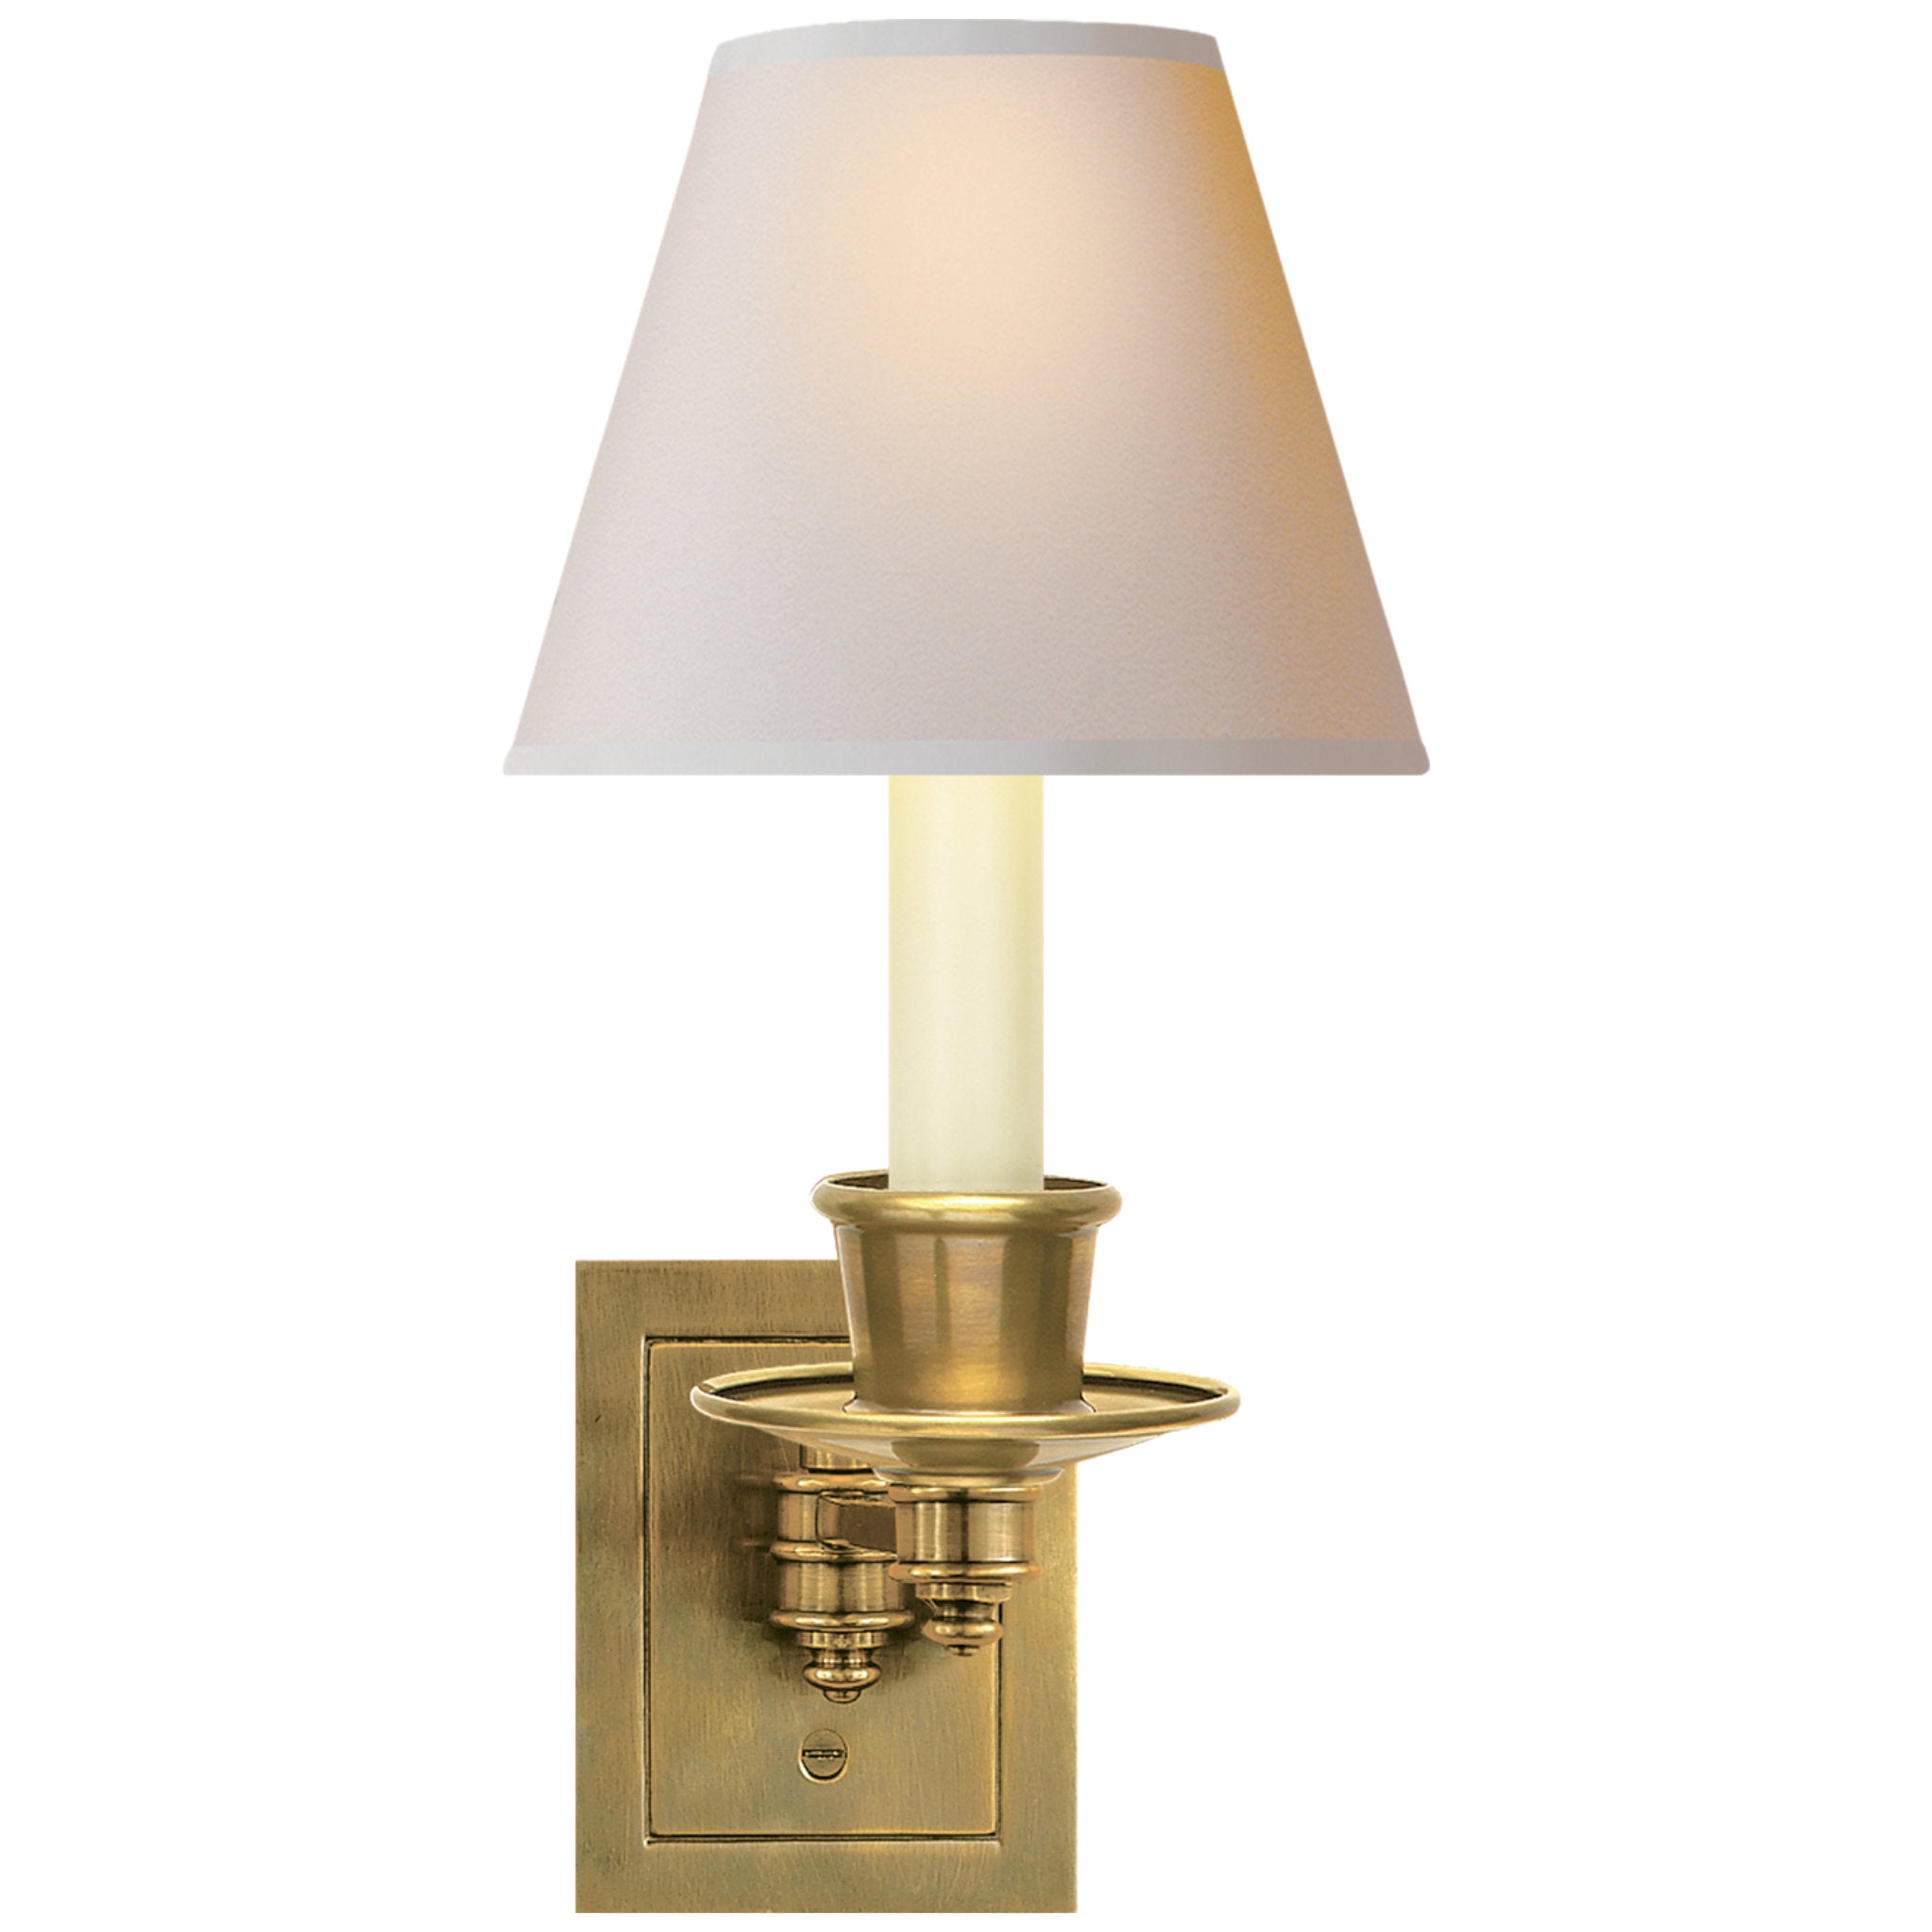 Visual Comfort Single Swing Arm Sconce in Hand-Rubbed Antique Brass with Natural Paper Shade